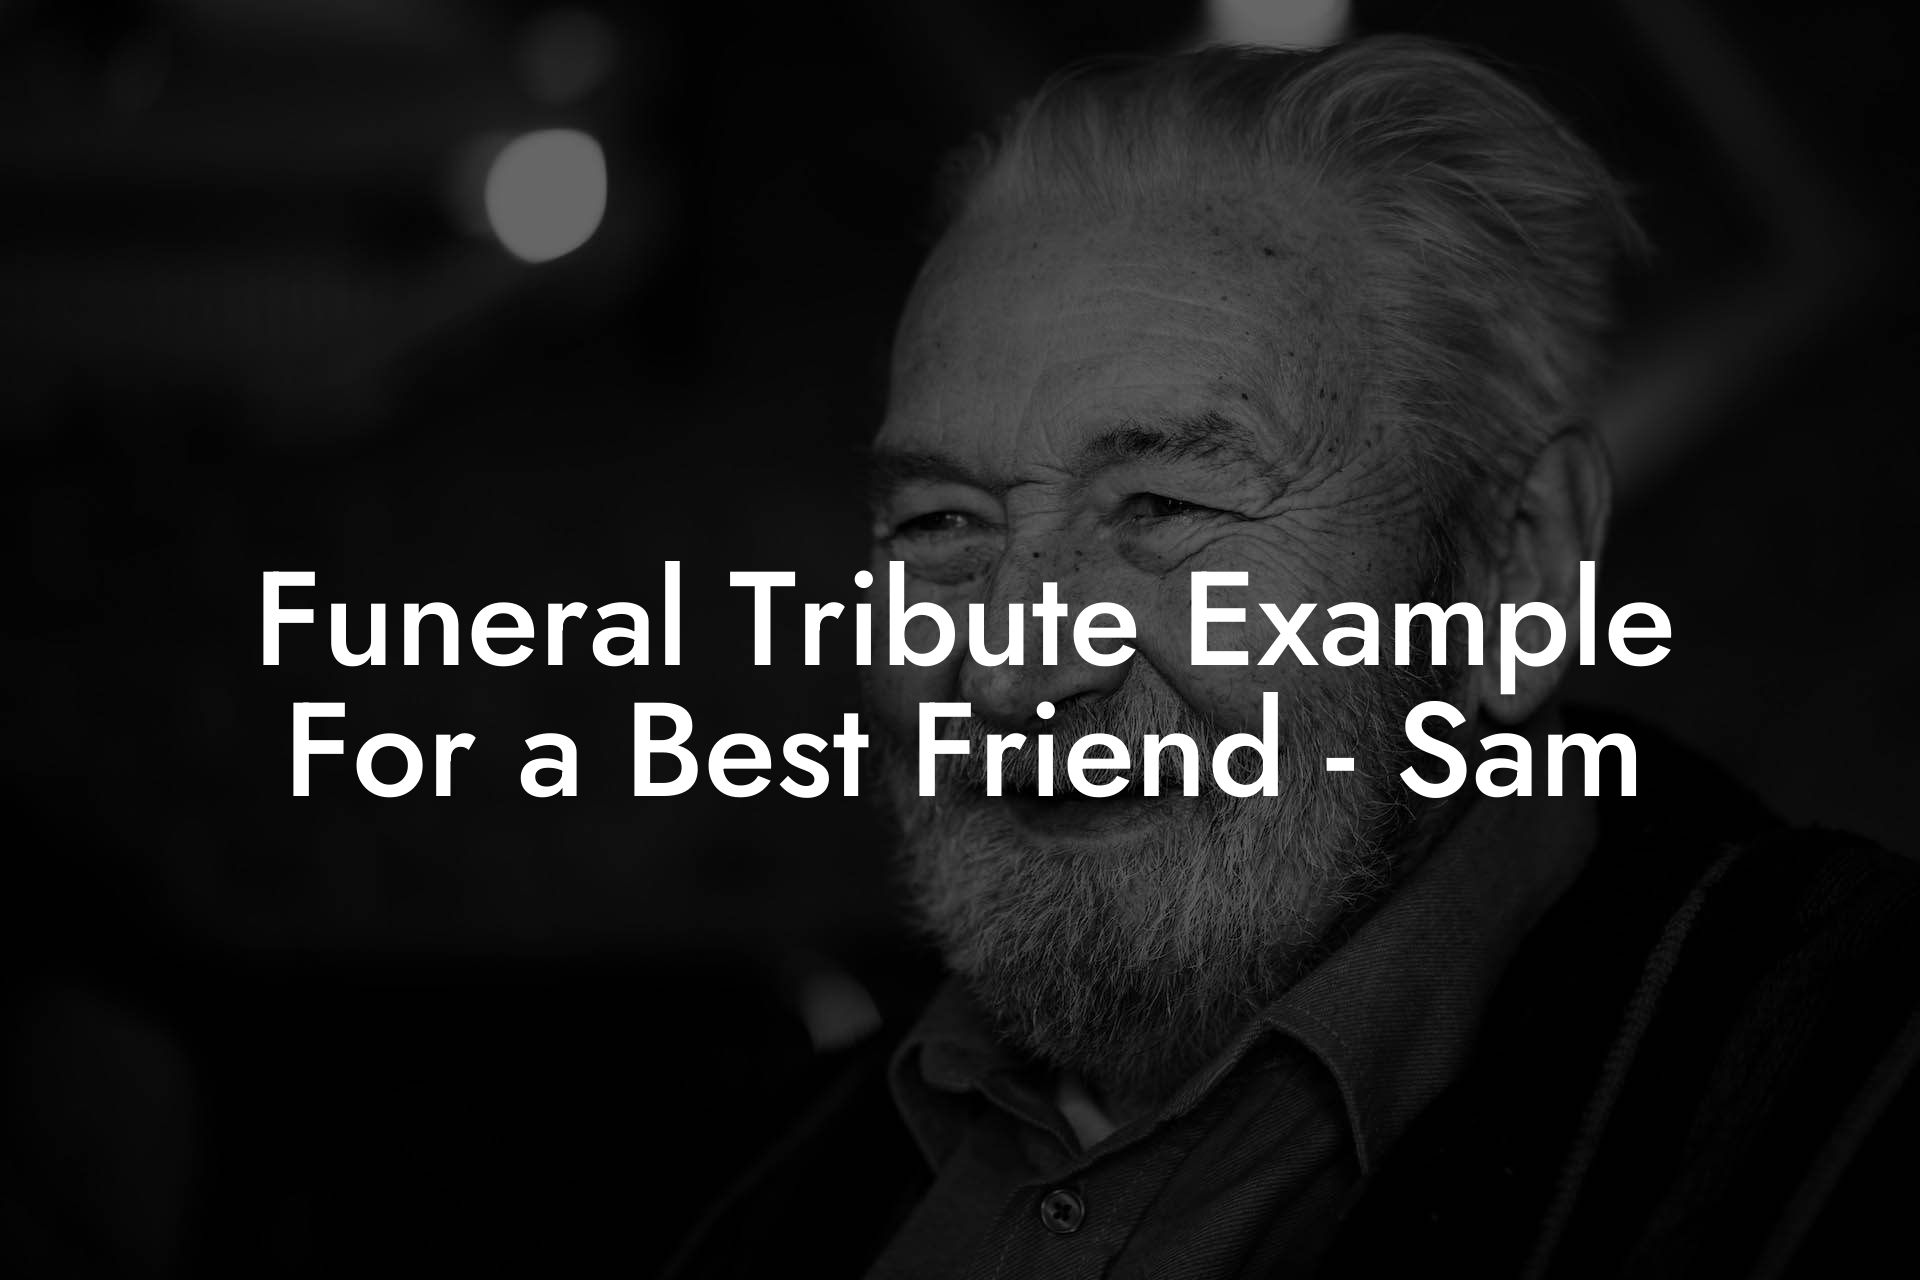 Funeral Tribute Example For a Best Friend - Sam